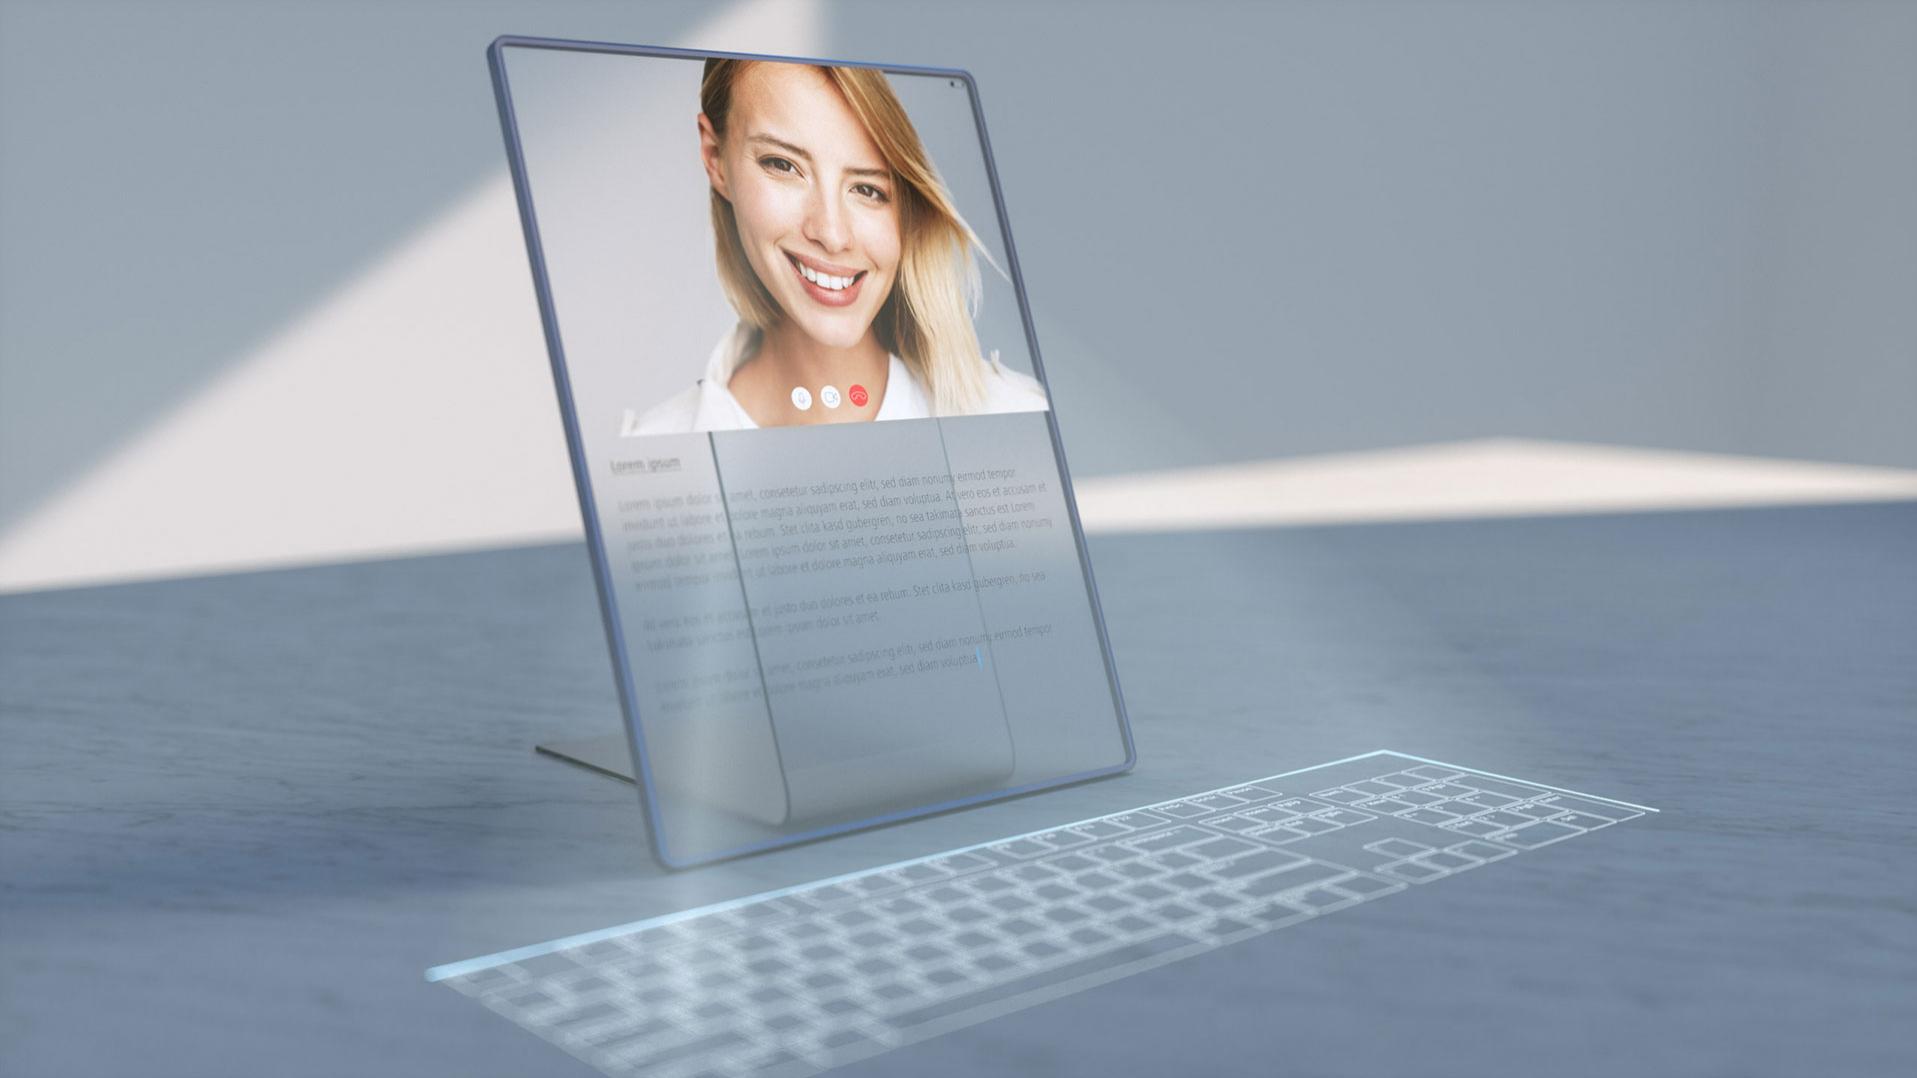 transparent tablet with open video chat and keyboard projected in front of it